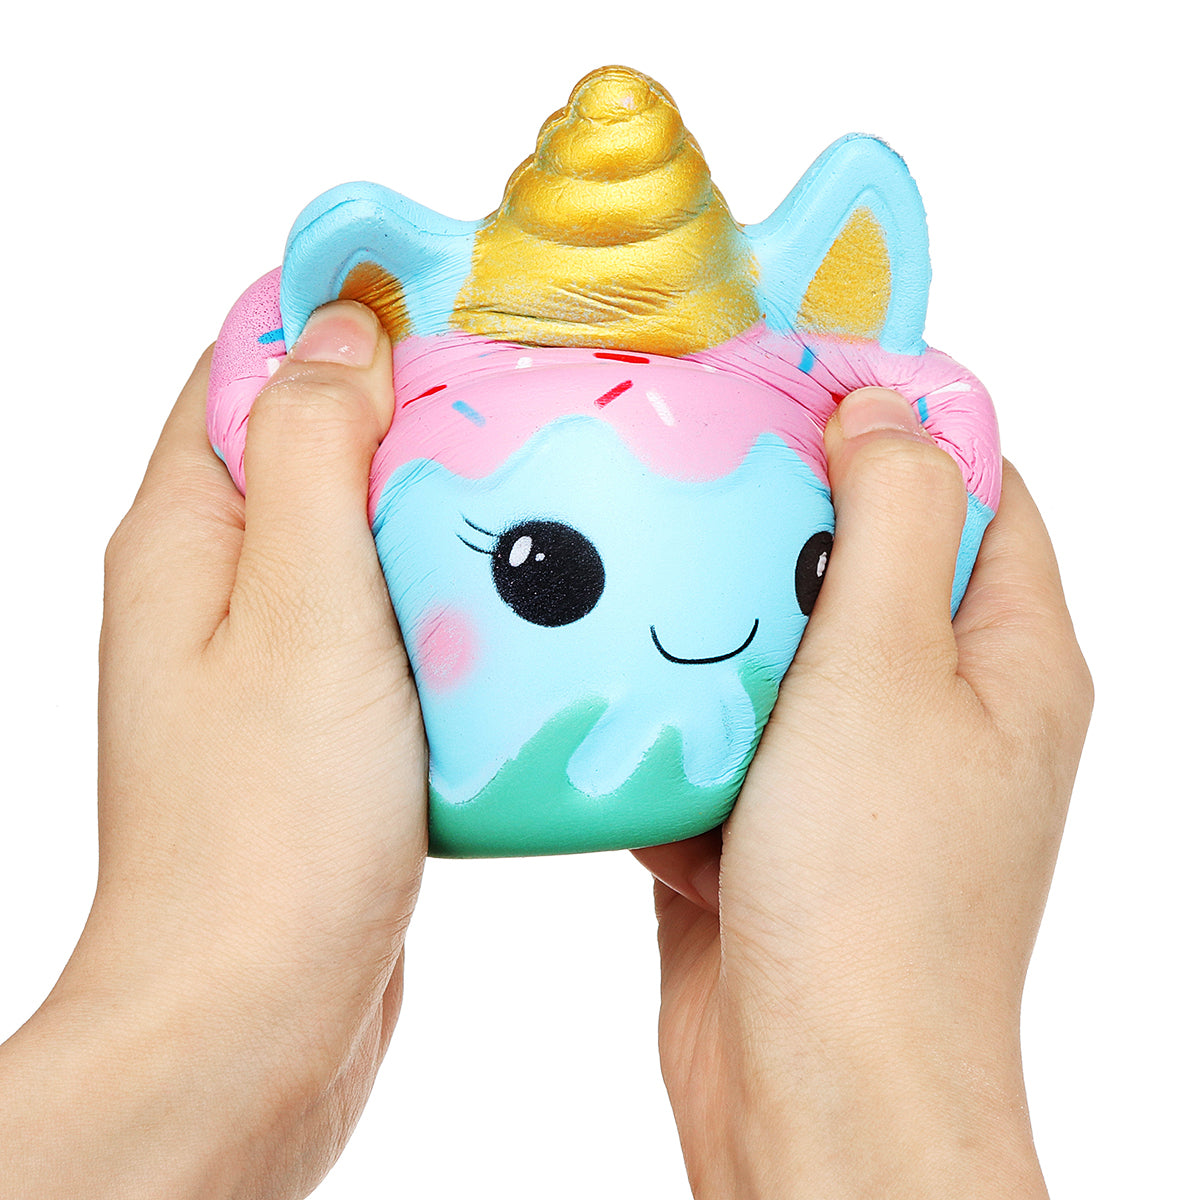 JUMBO Unicorn Cake Squishy Slow Rise Foam Pet Animal Toy - Scented Sen |  Curious Minds Busy Bags